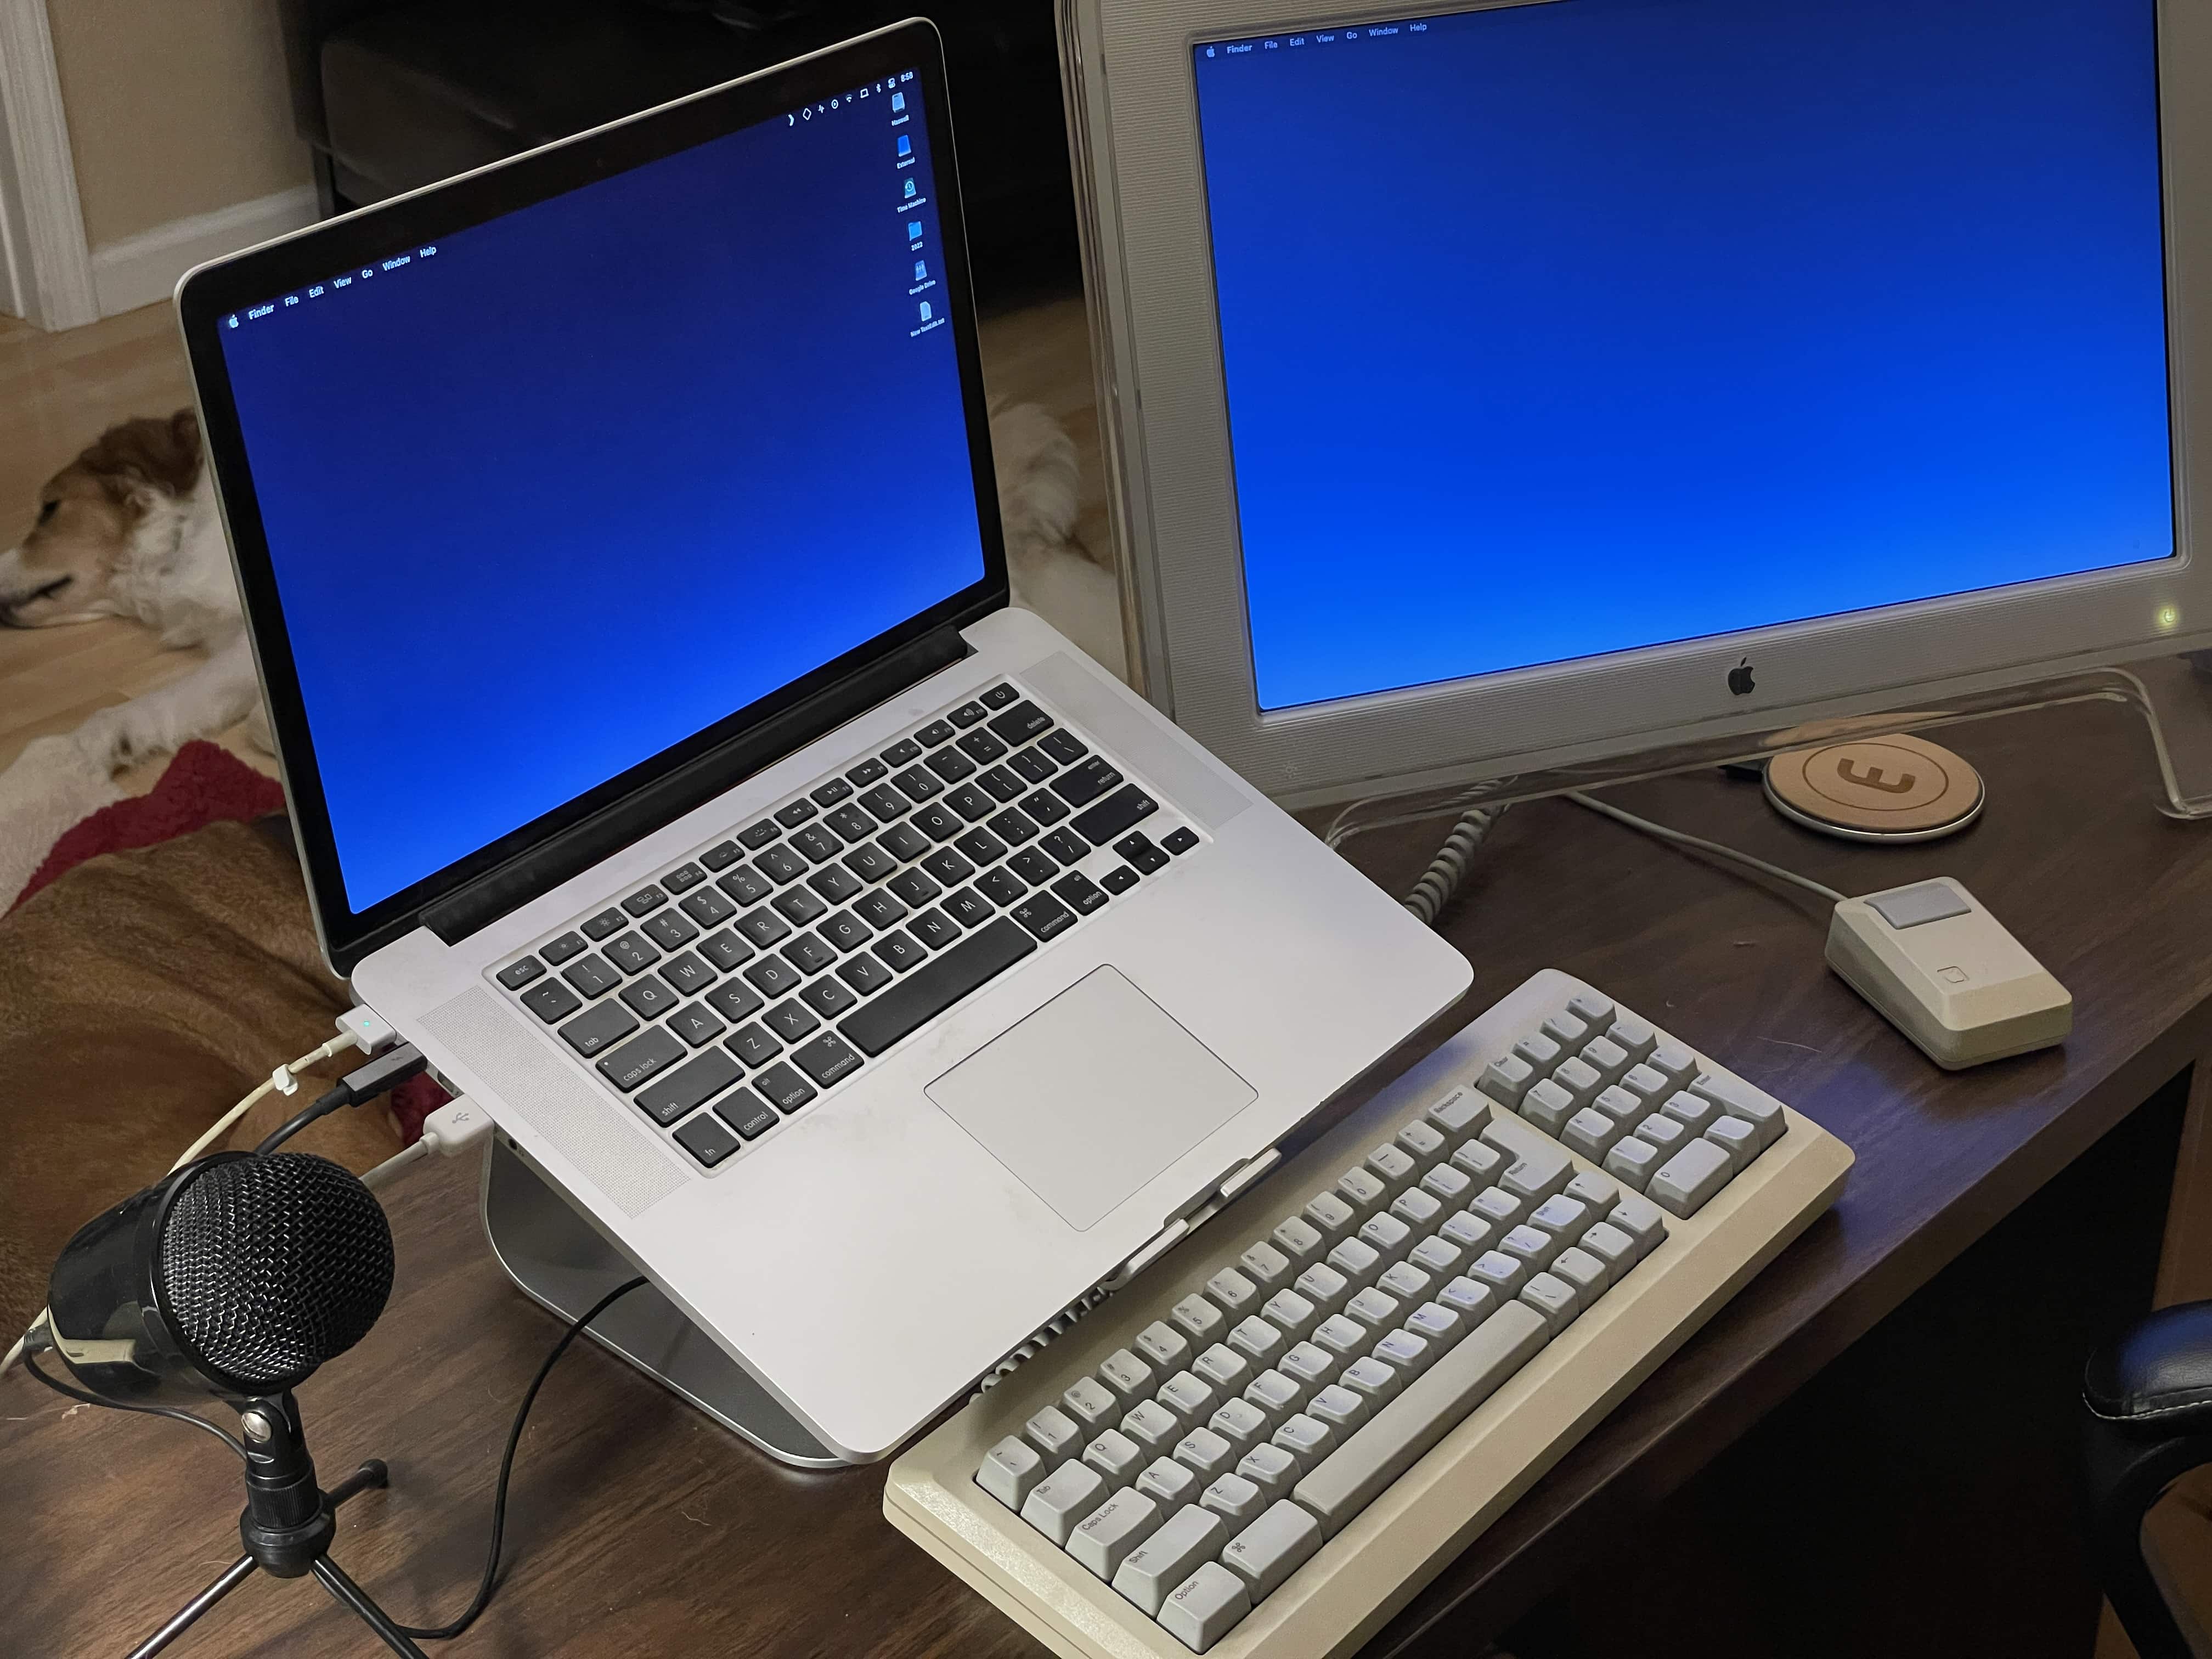 Macintosh Keyboard and Macintosh Mouse connected to my MacBook Pro and Cinema Display